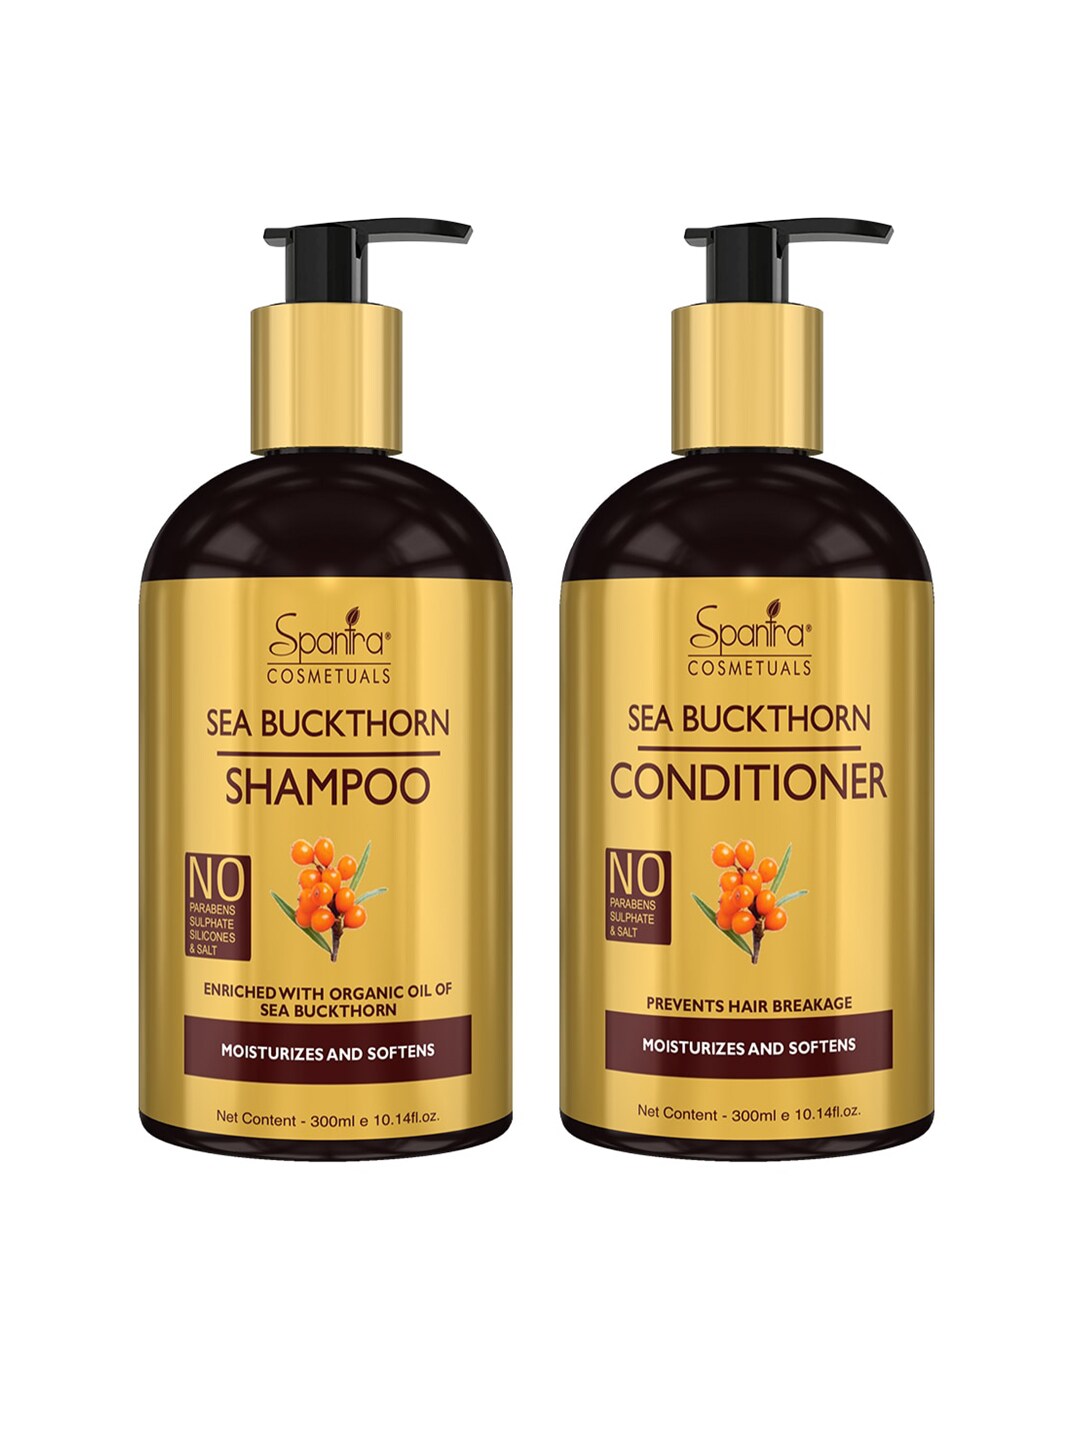 Spantra Sea Buckthorn Shampoo & Conditioner Combo Price in India